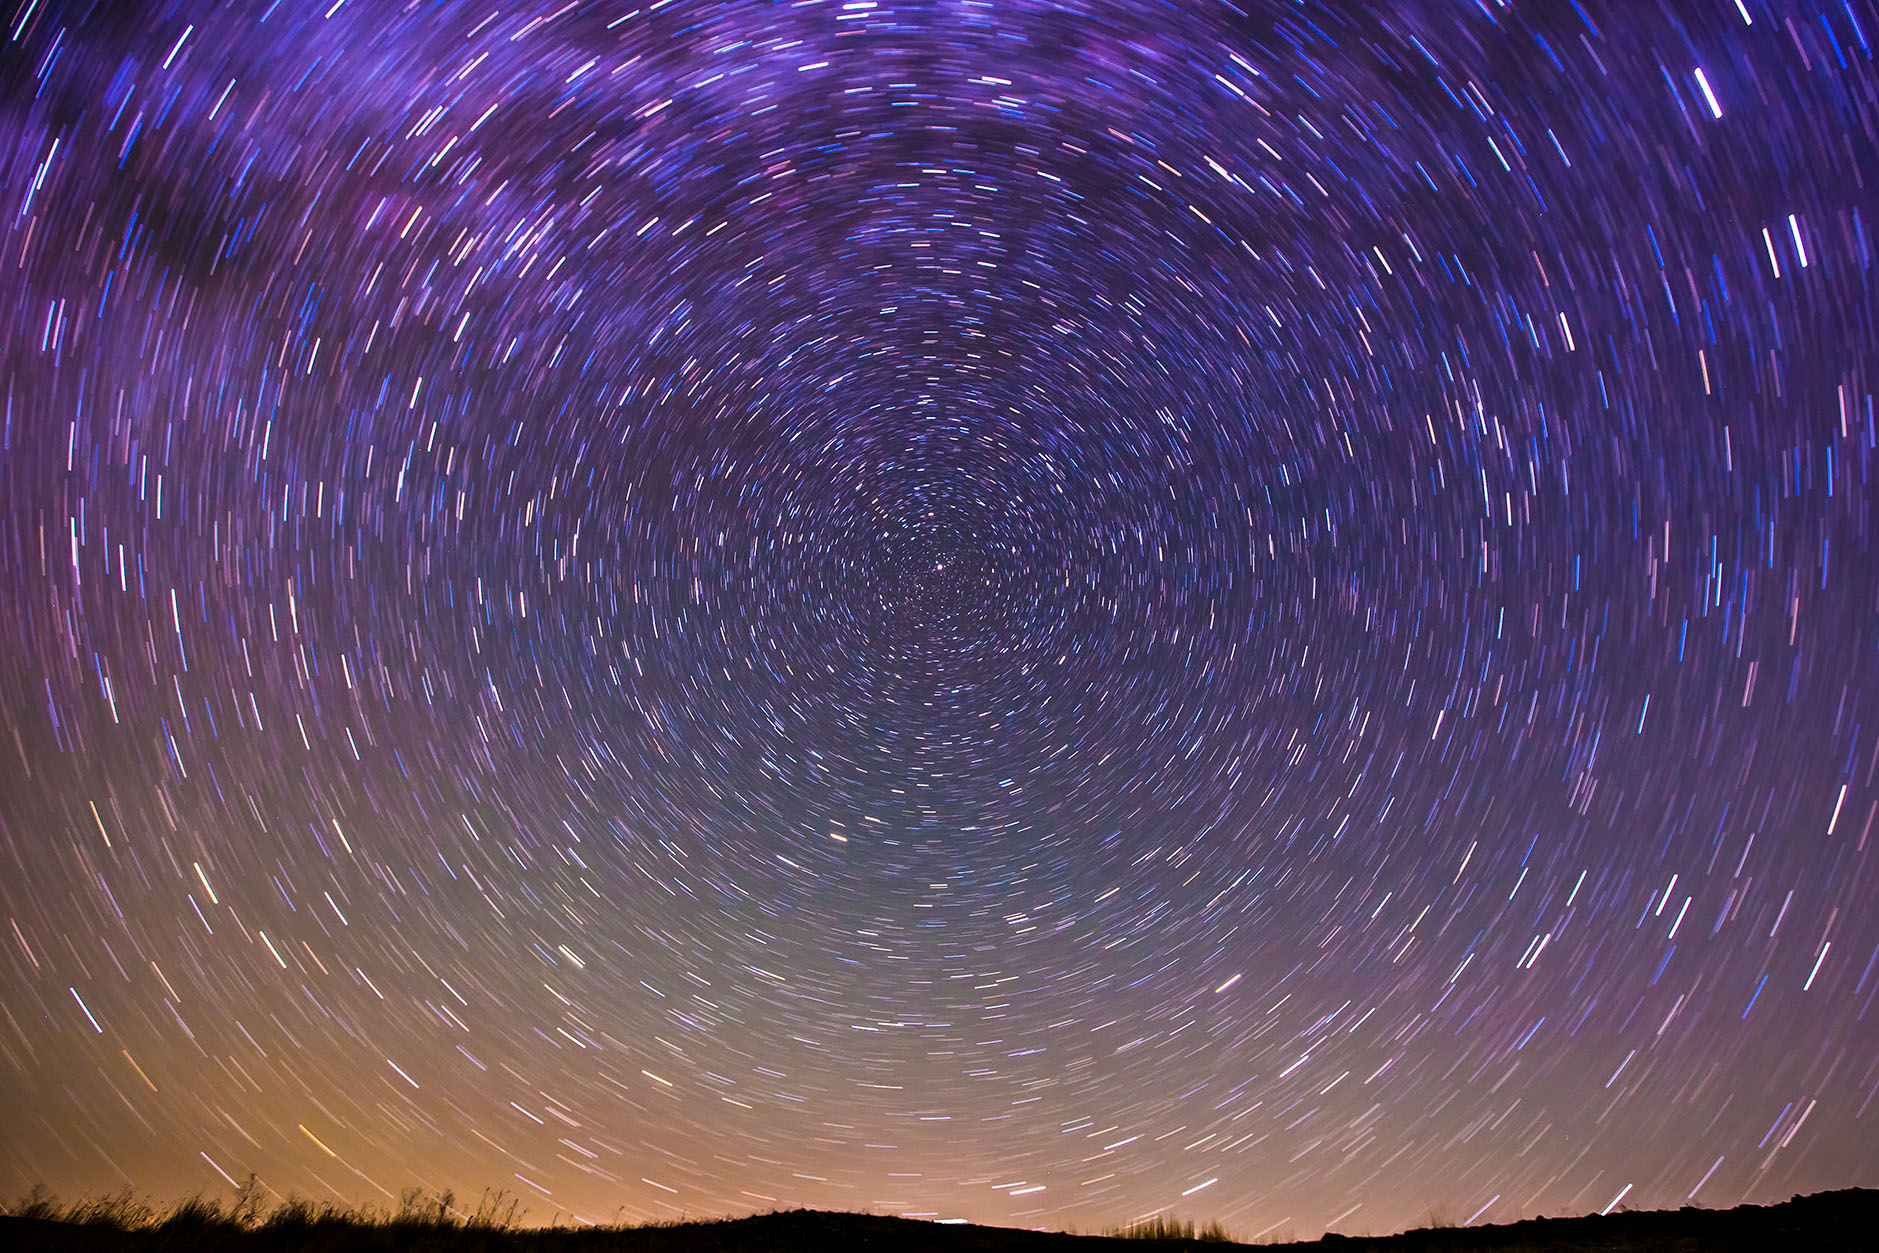 Stars blurred in the sky at sunset